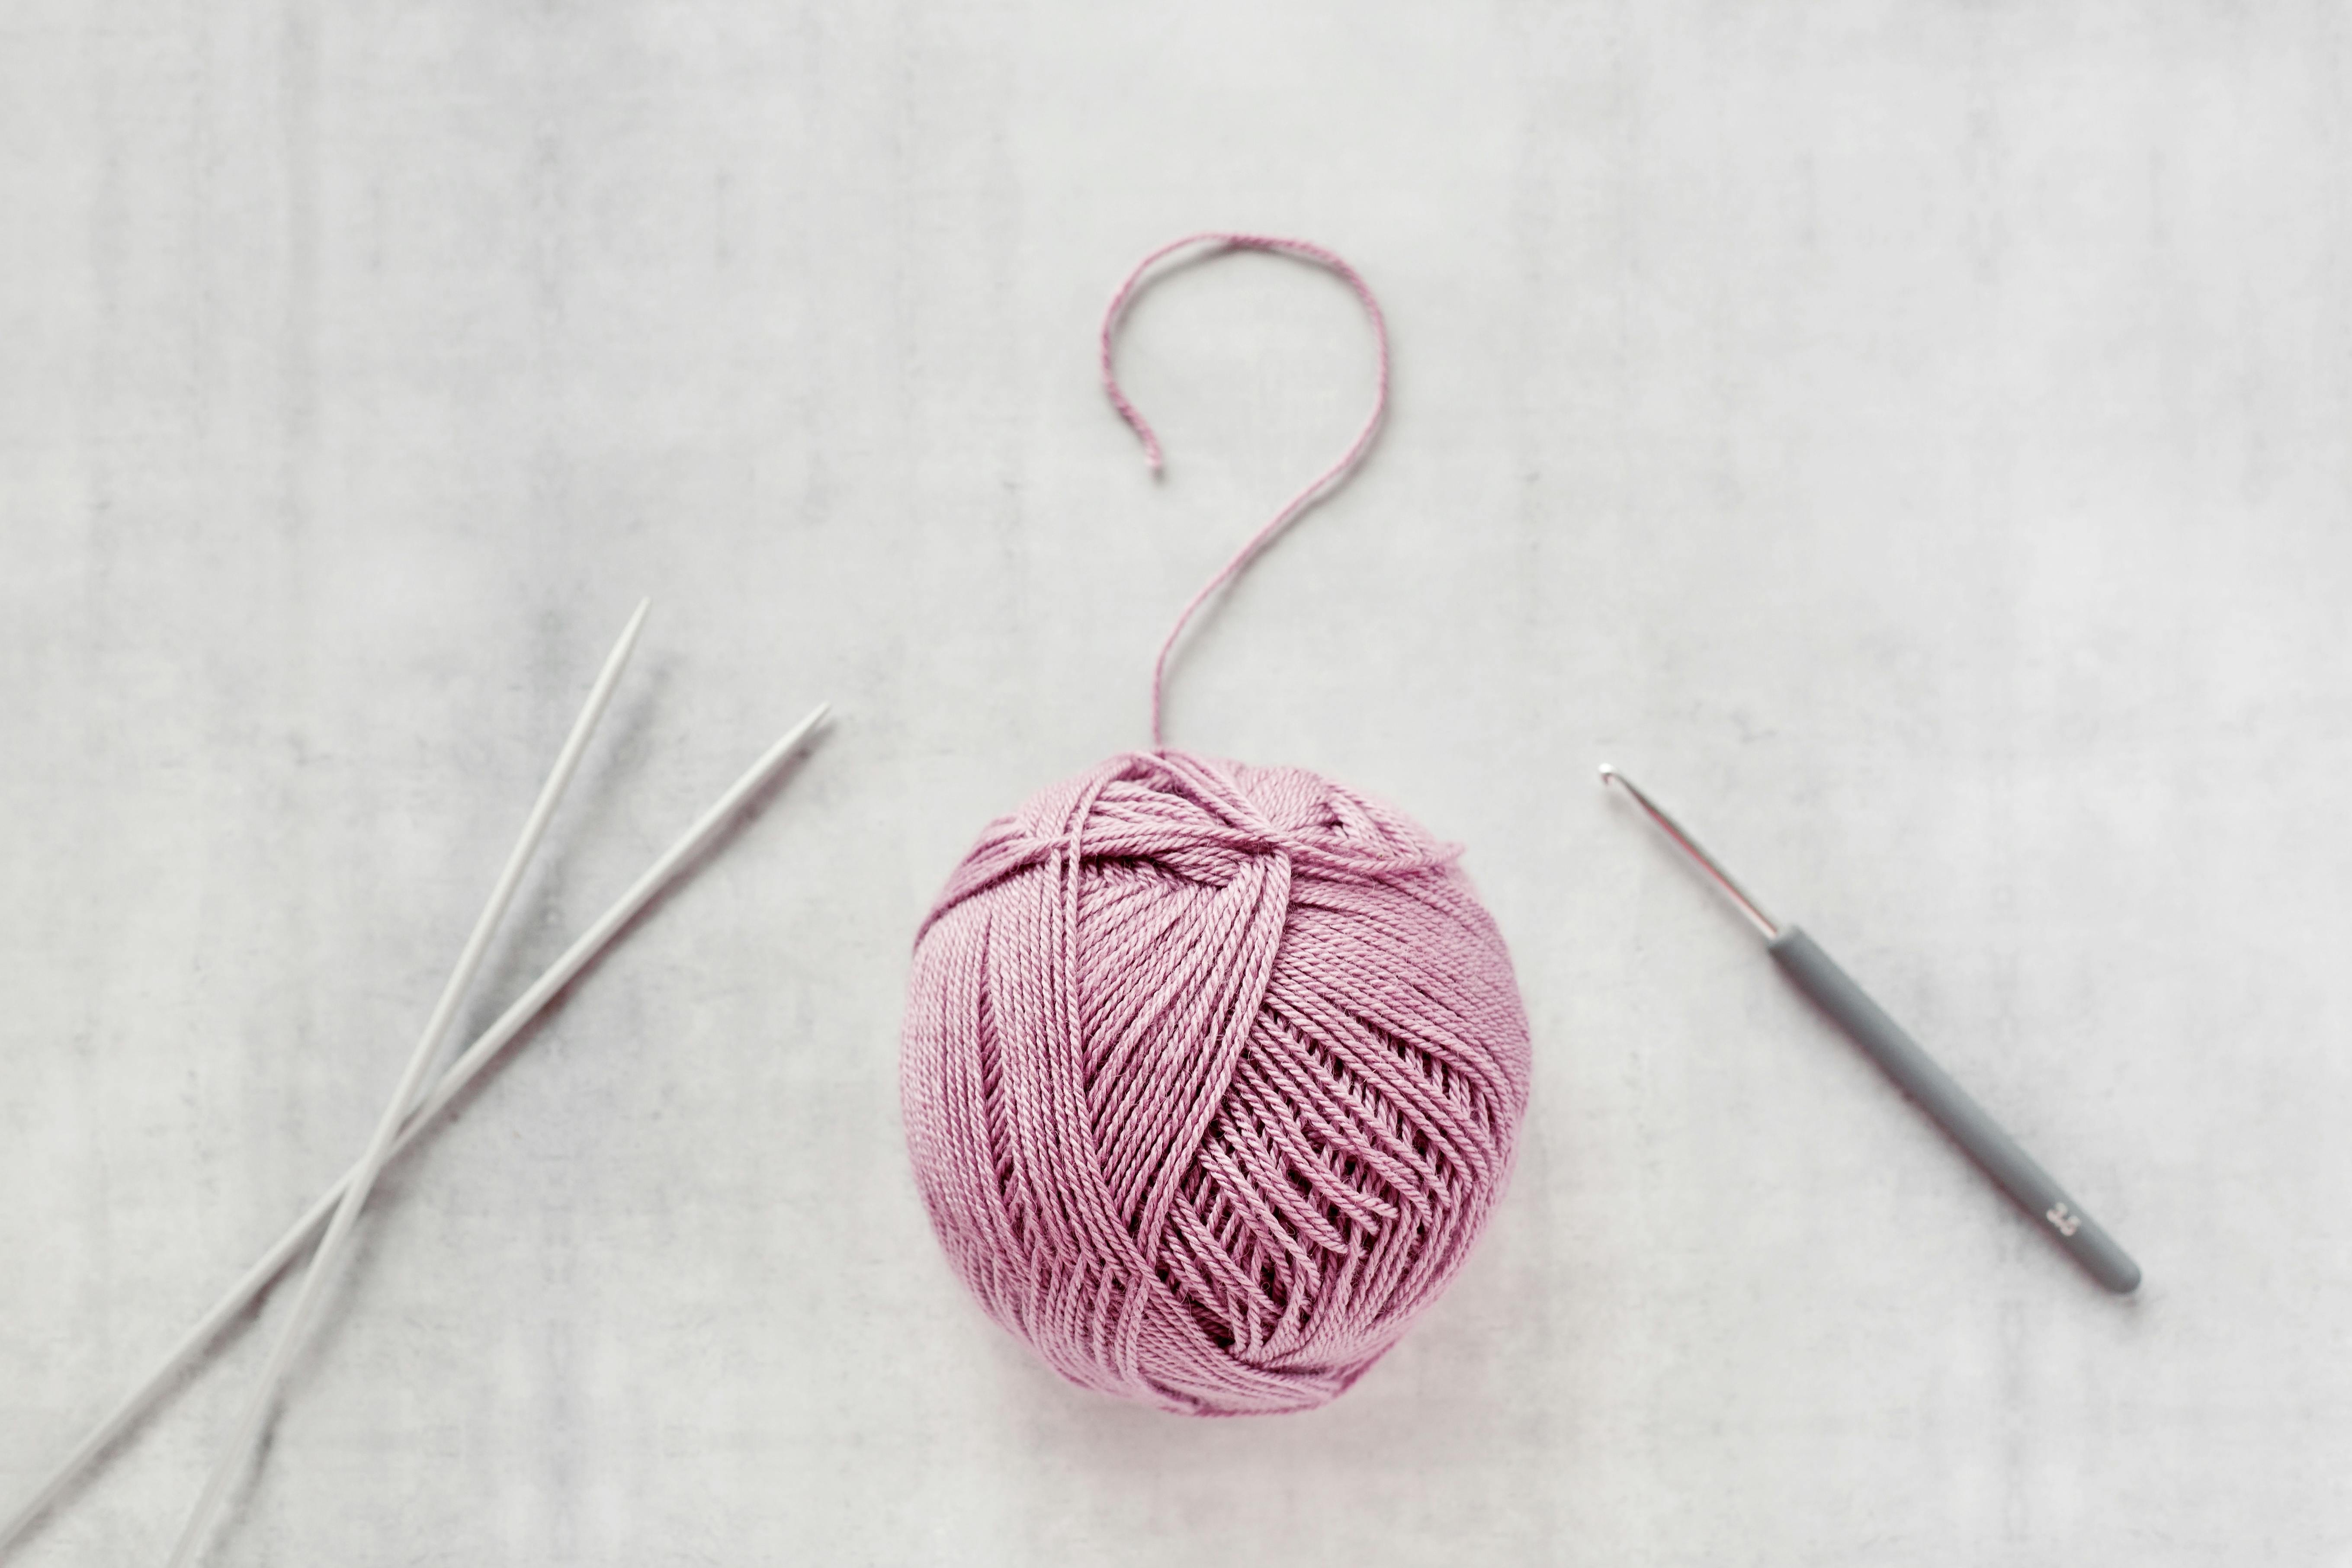 a ball of pink yarn with knitting needles on the left and a crochet hook to the right